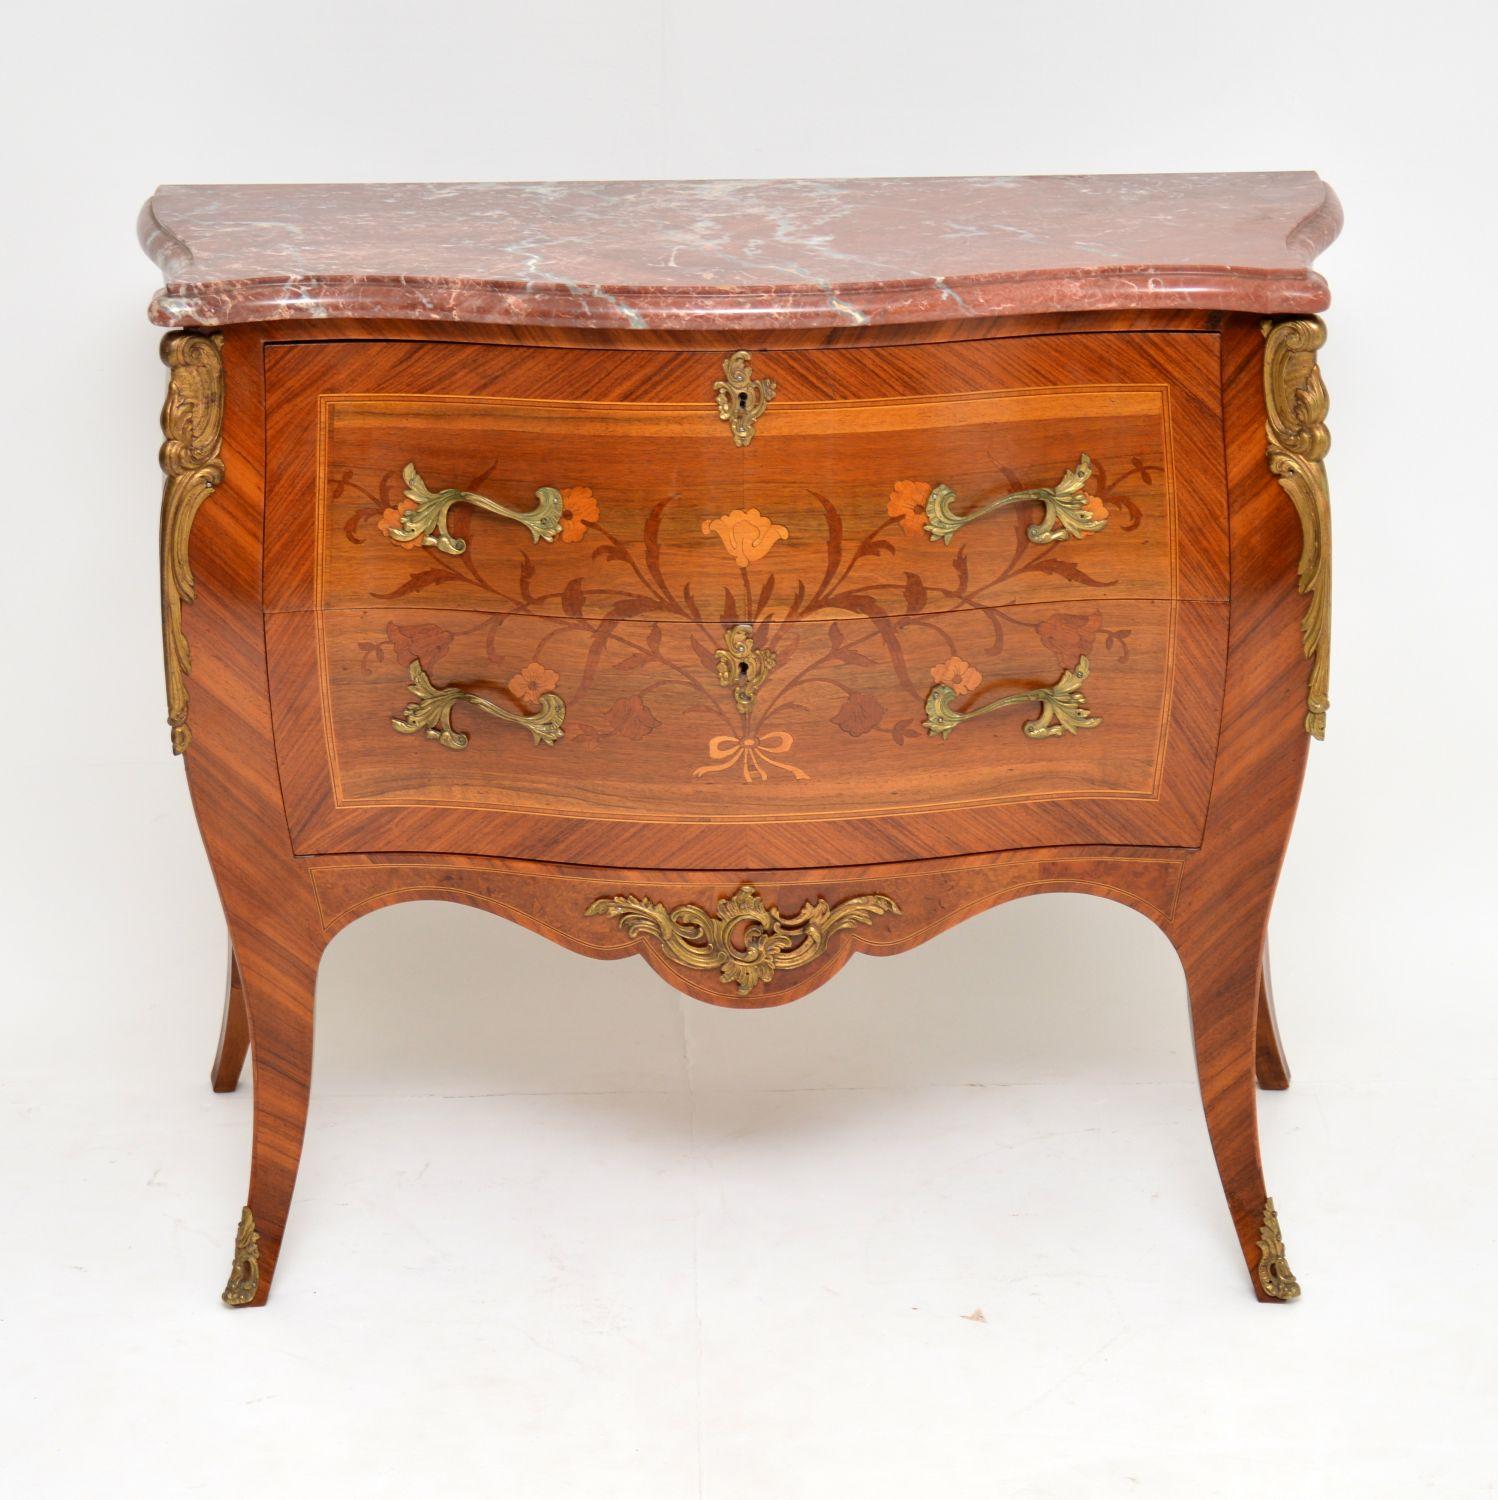 Antique French marble-top bombe commode chest in good condition and dating from circa 1920s period.

It has a rouge marble top which is also in good condition and lifts off from base. The wood is mainly kingwood and rosewood, plus many other more